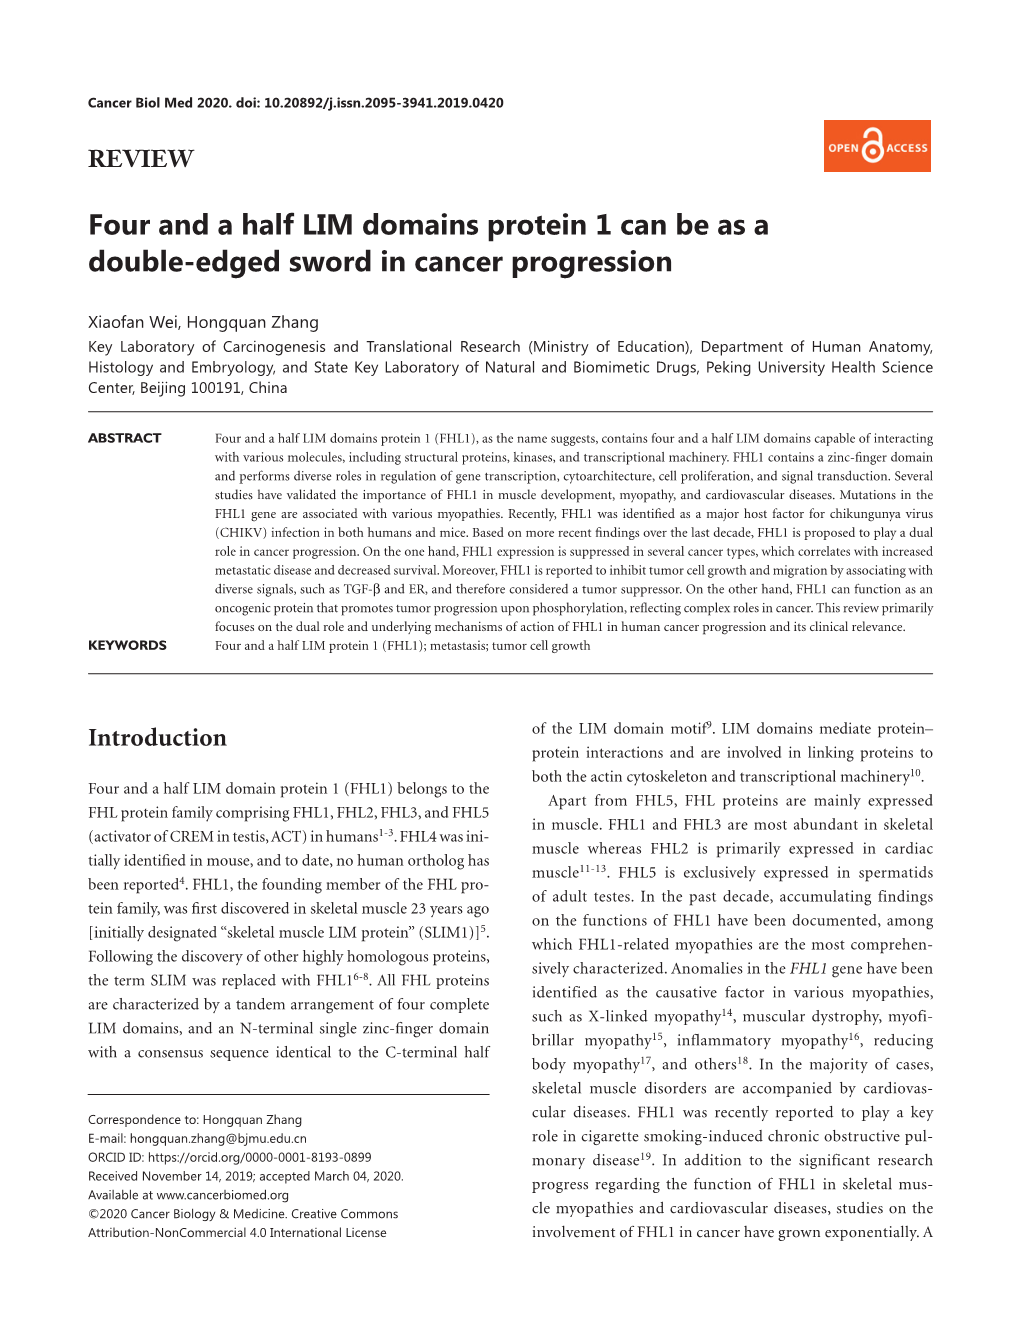 Four and a Half LIM Domains Protein 1 Can Be As a Double-Edged Sword in Cancer Progression